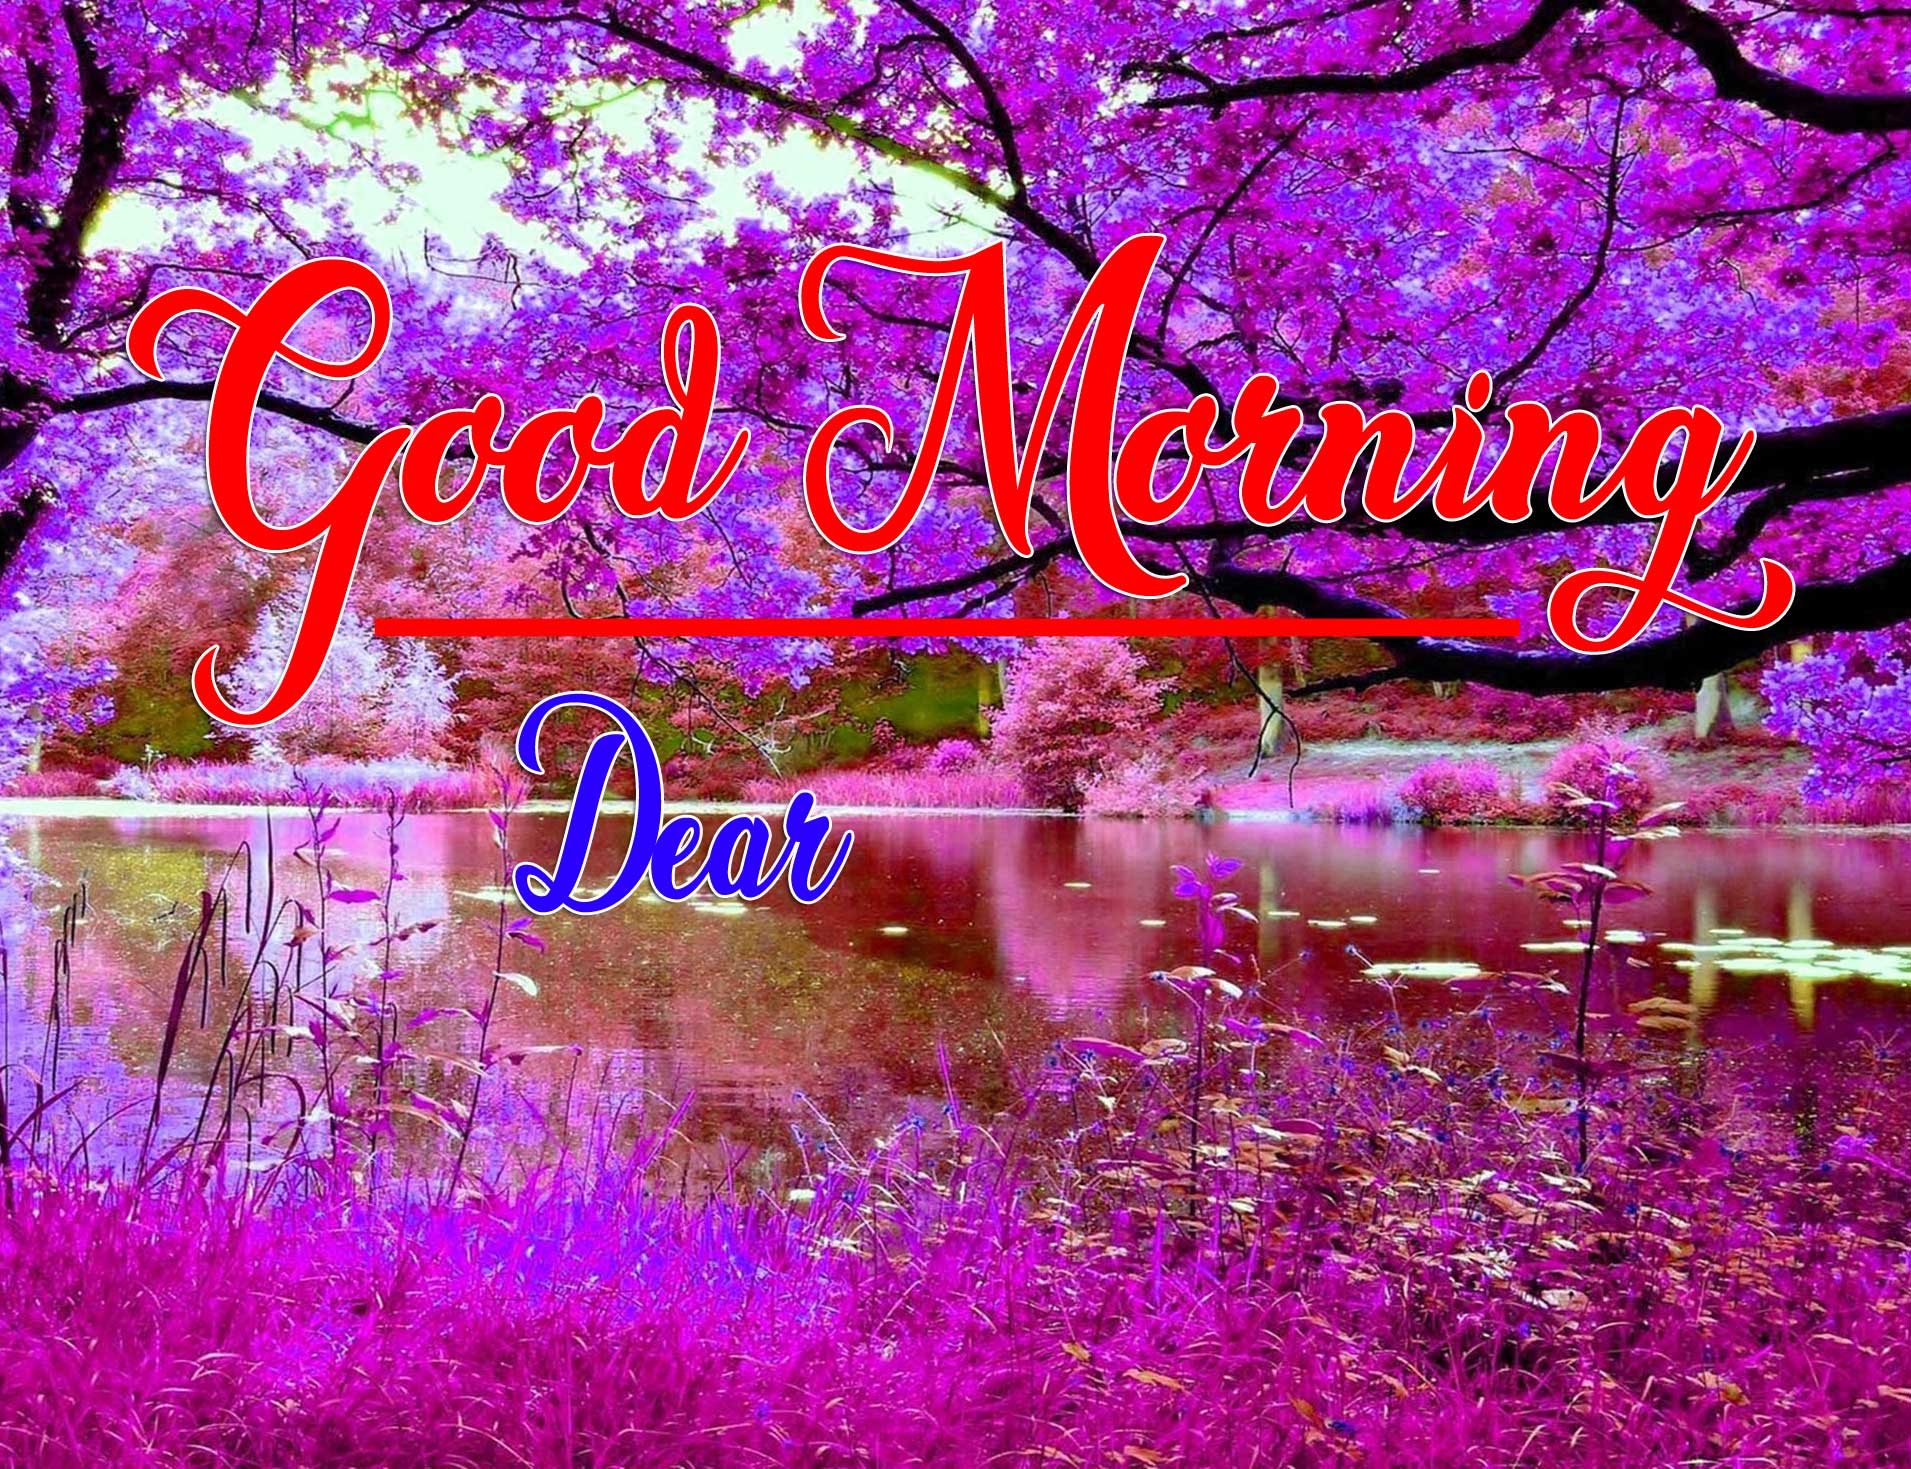 Good Morning Wishes Wallpaper Pics Pictures Download 